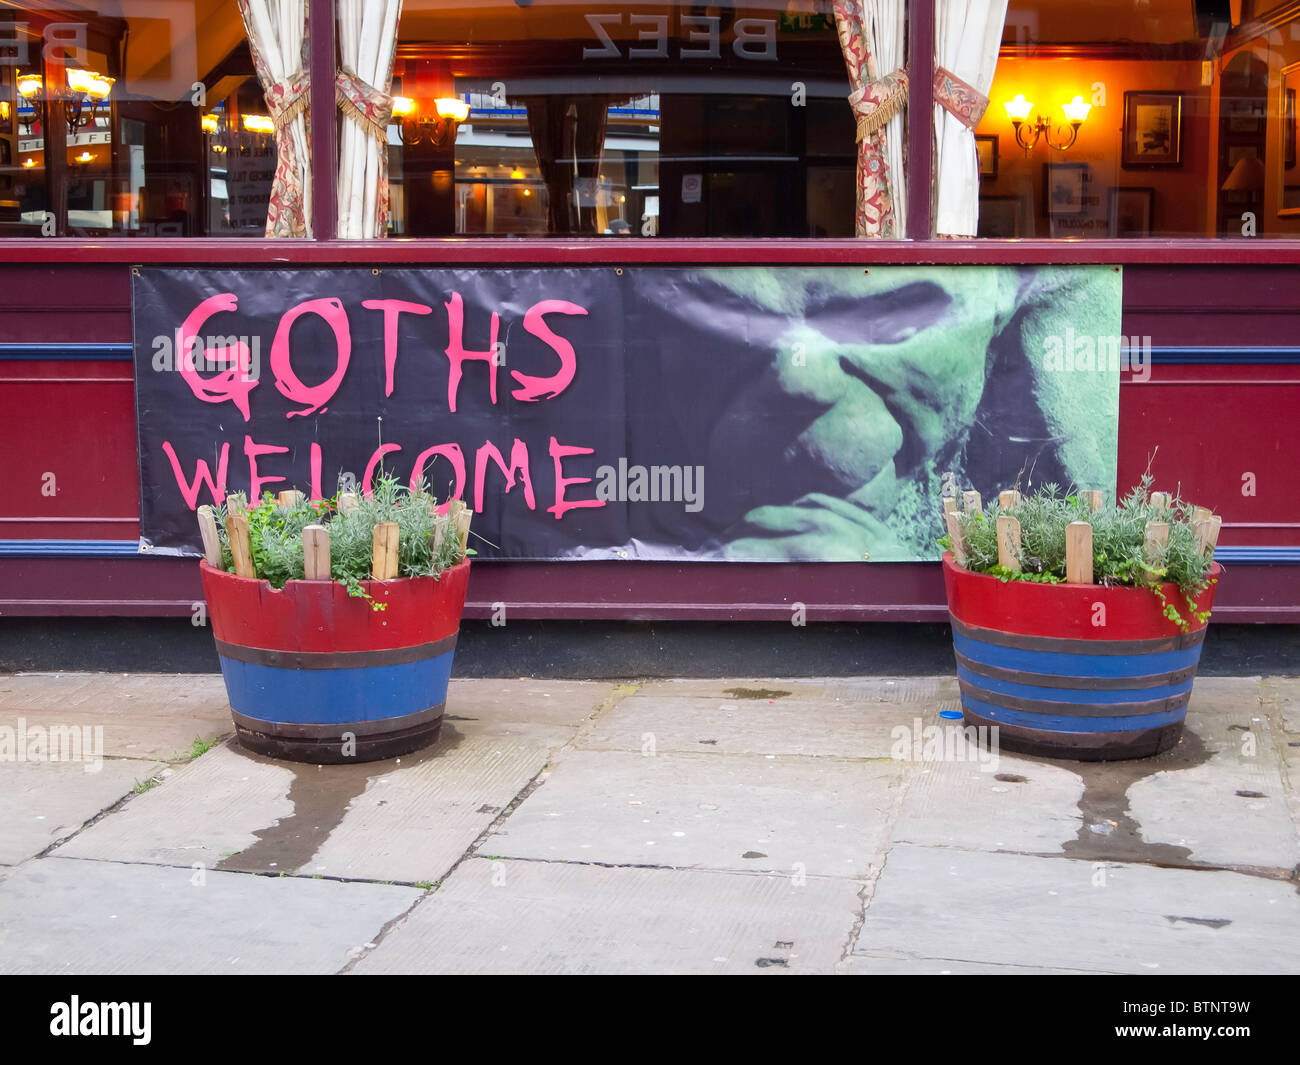 Pub sign in Whitby Goths Welcome for the Whitby Goth Weekend WGW Stock Photo